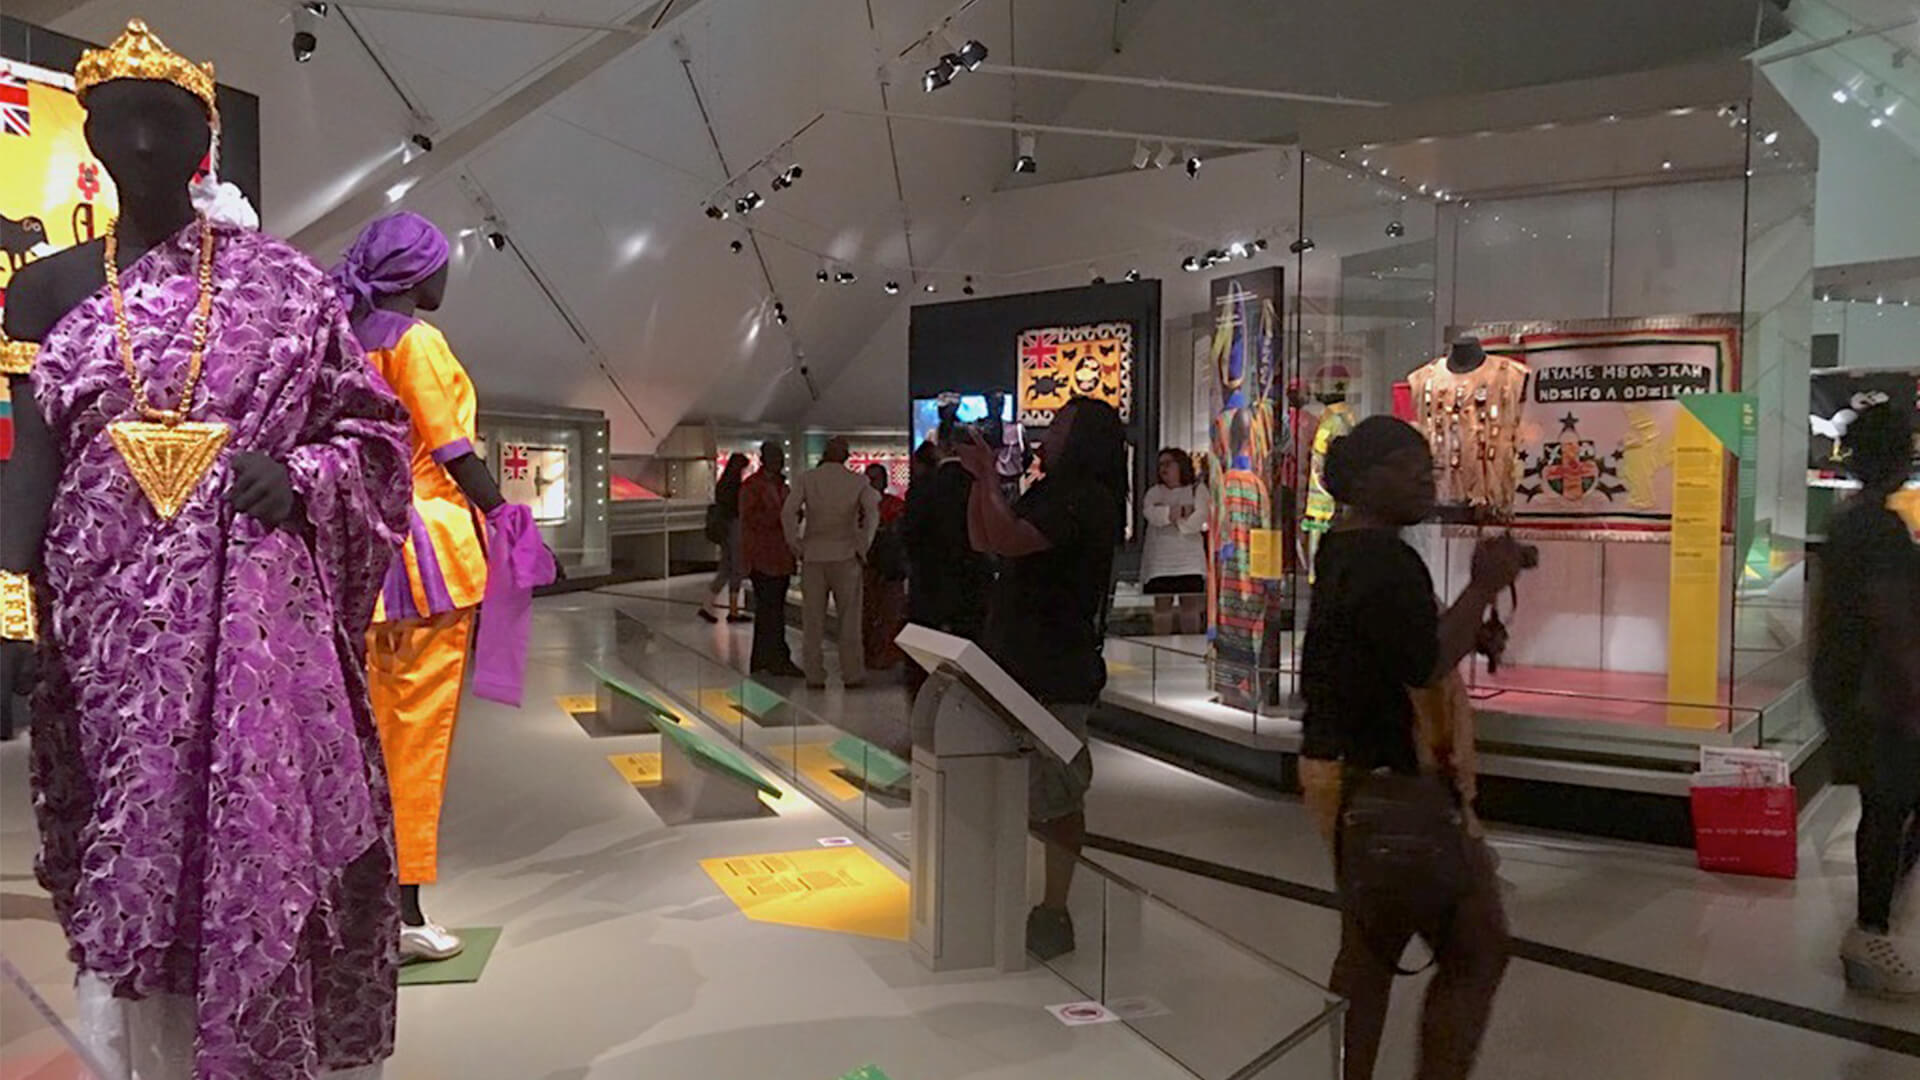 Visitors walking past several display cases containing Ghanese artifacts in an exhibition gallery space.